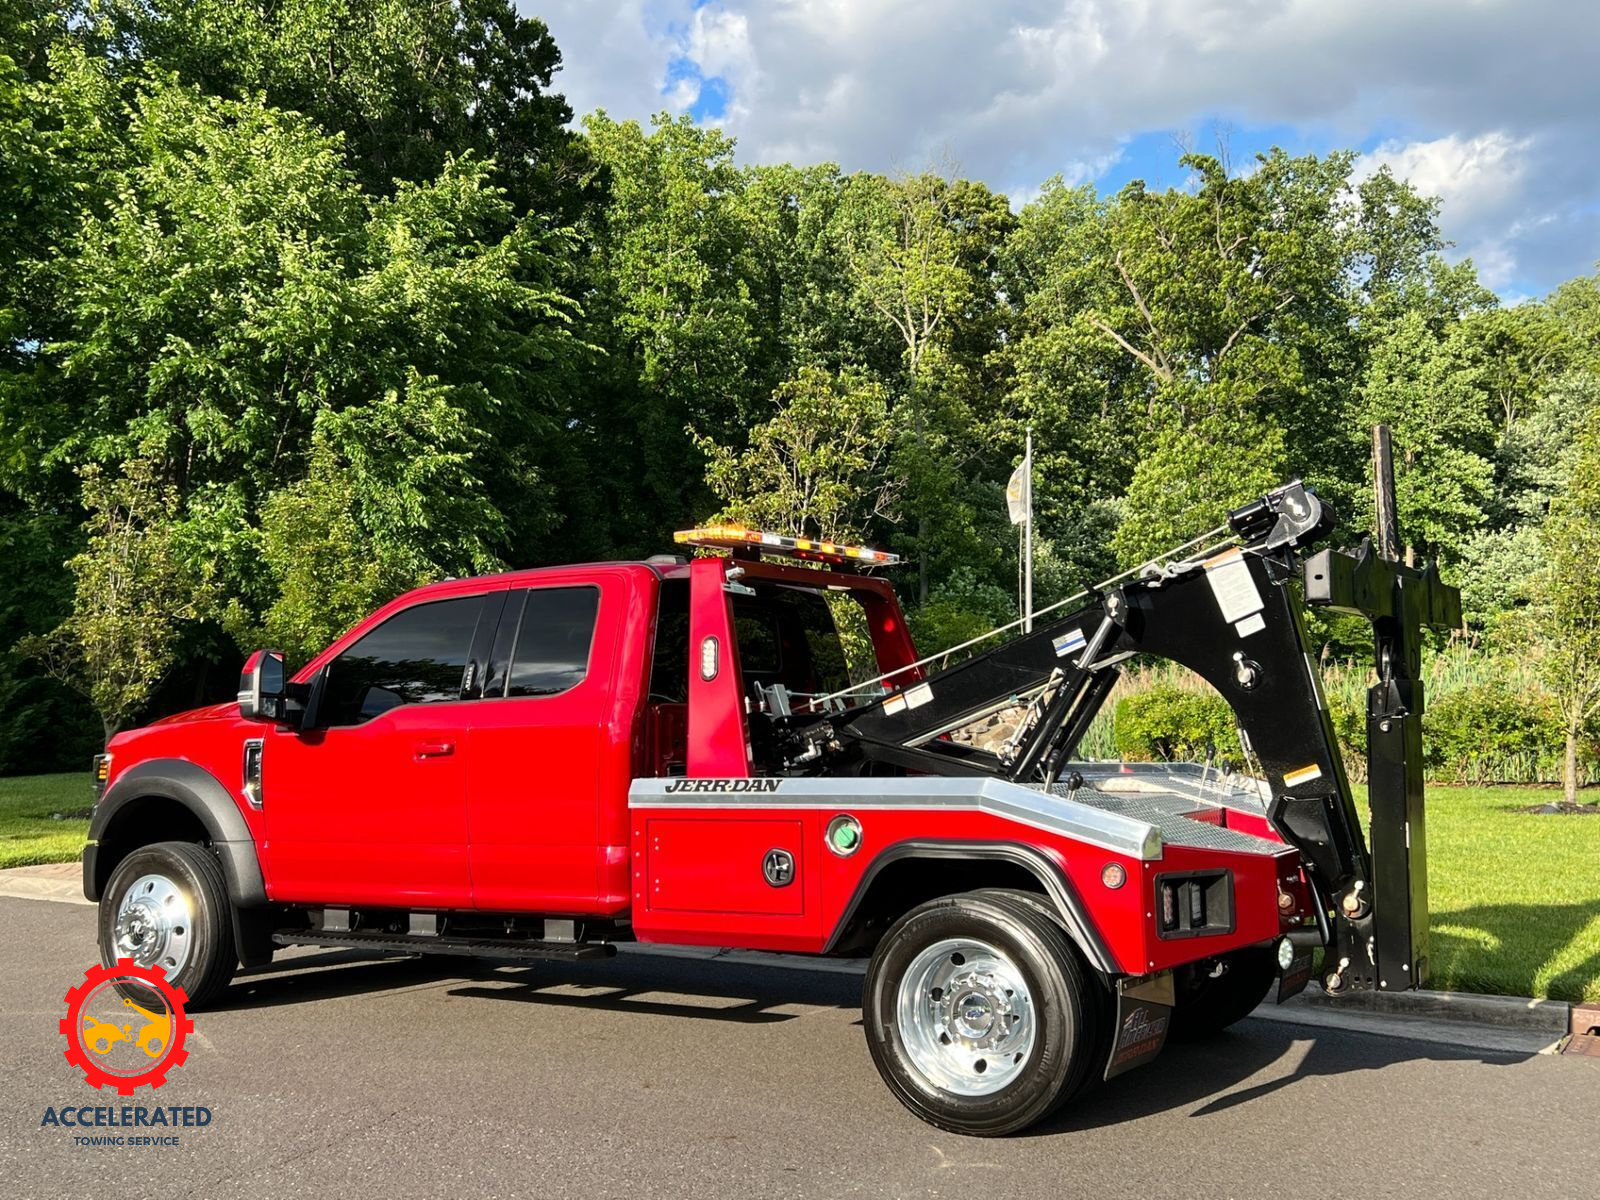 Accelerated Towing Service